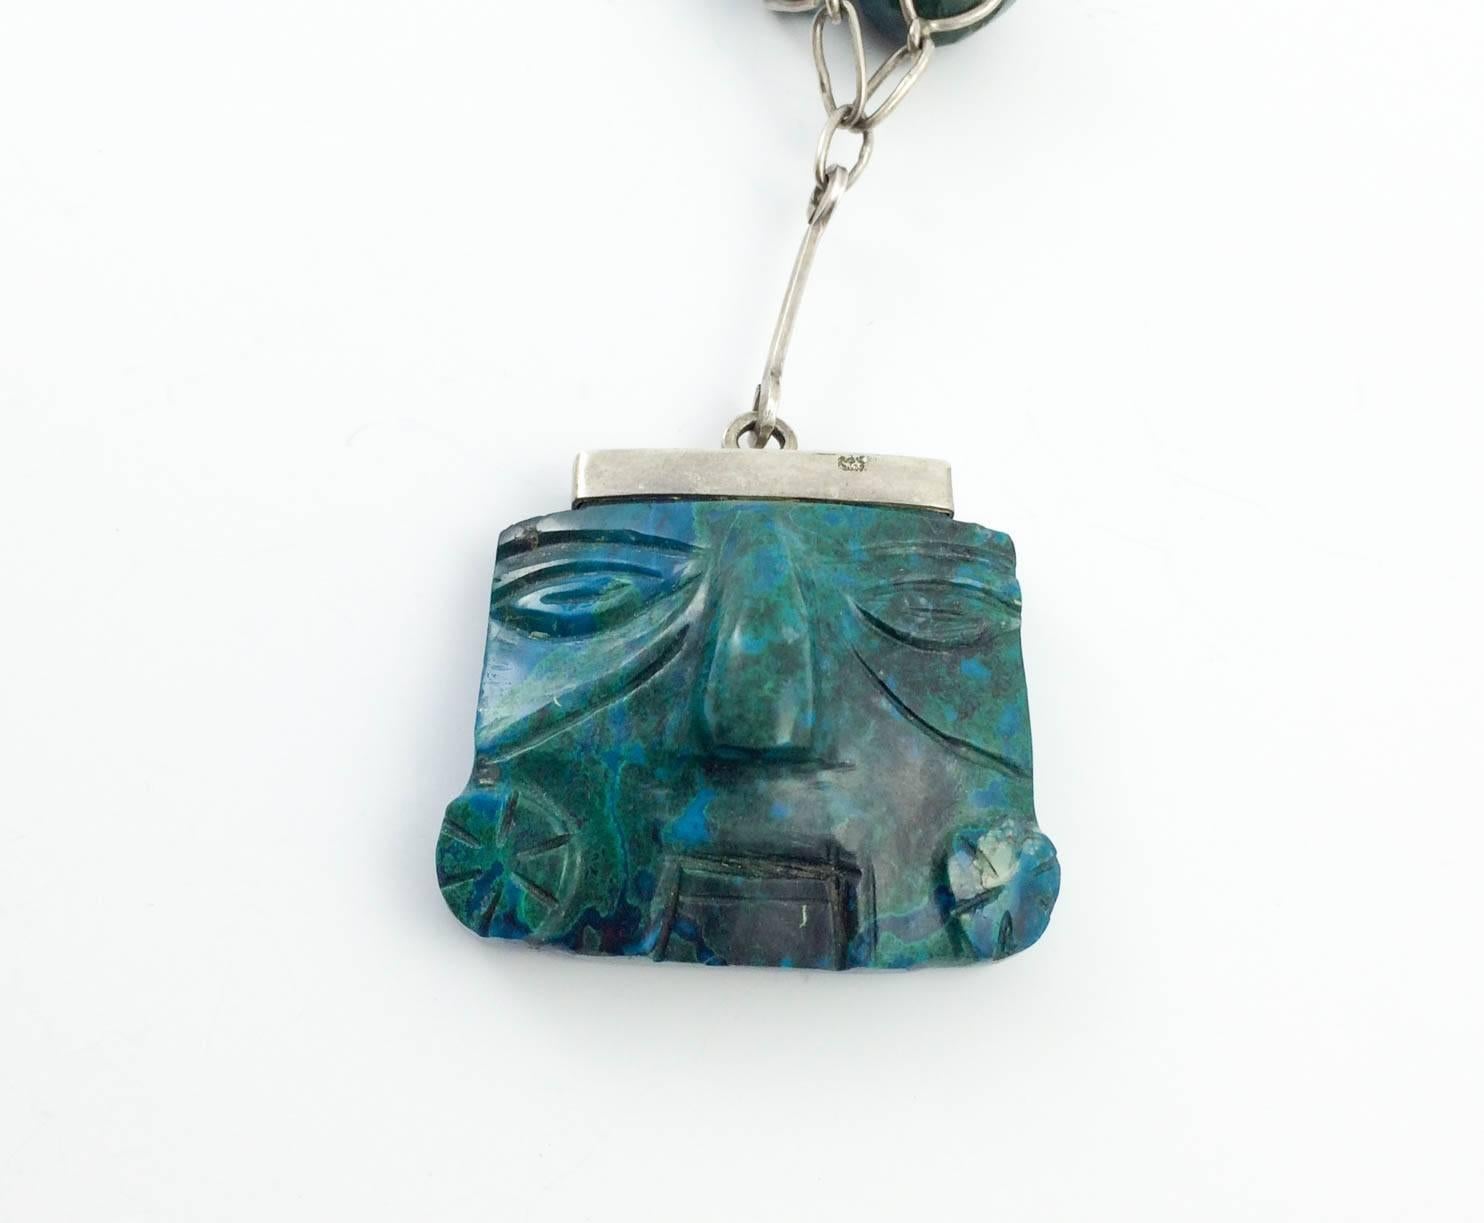 Women's Silver and Peruvian Turquoise Necklace - 1970s